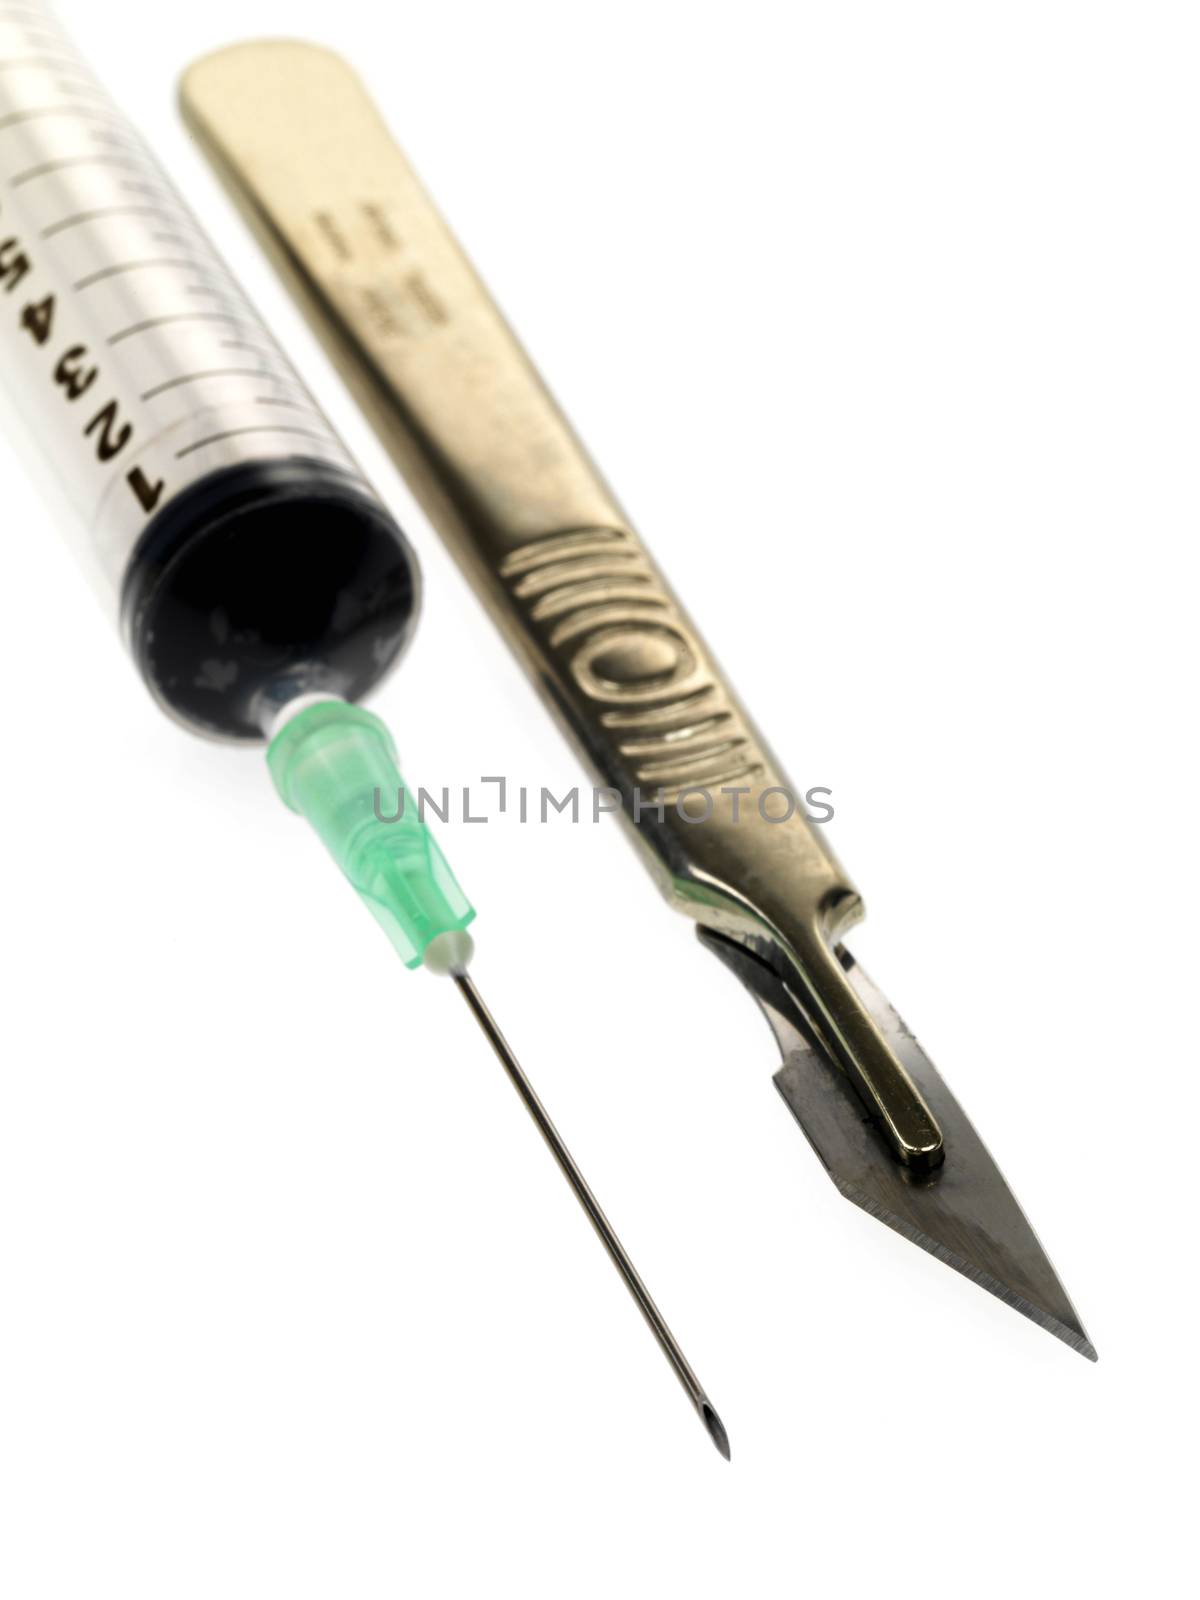 Surgical Tools Scalpel and Needle by Whiteboxmedia